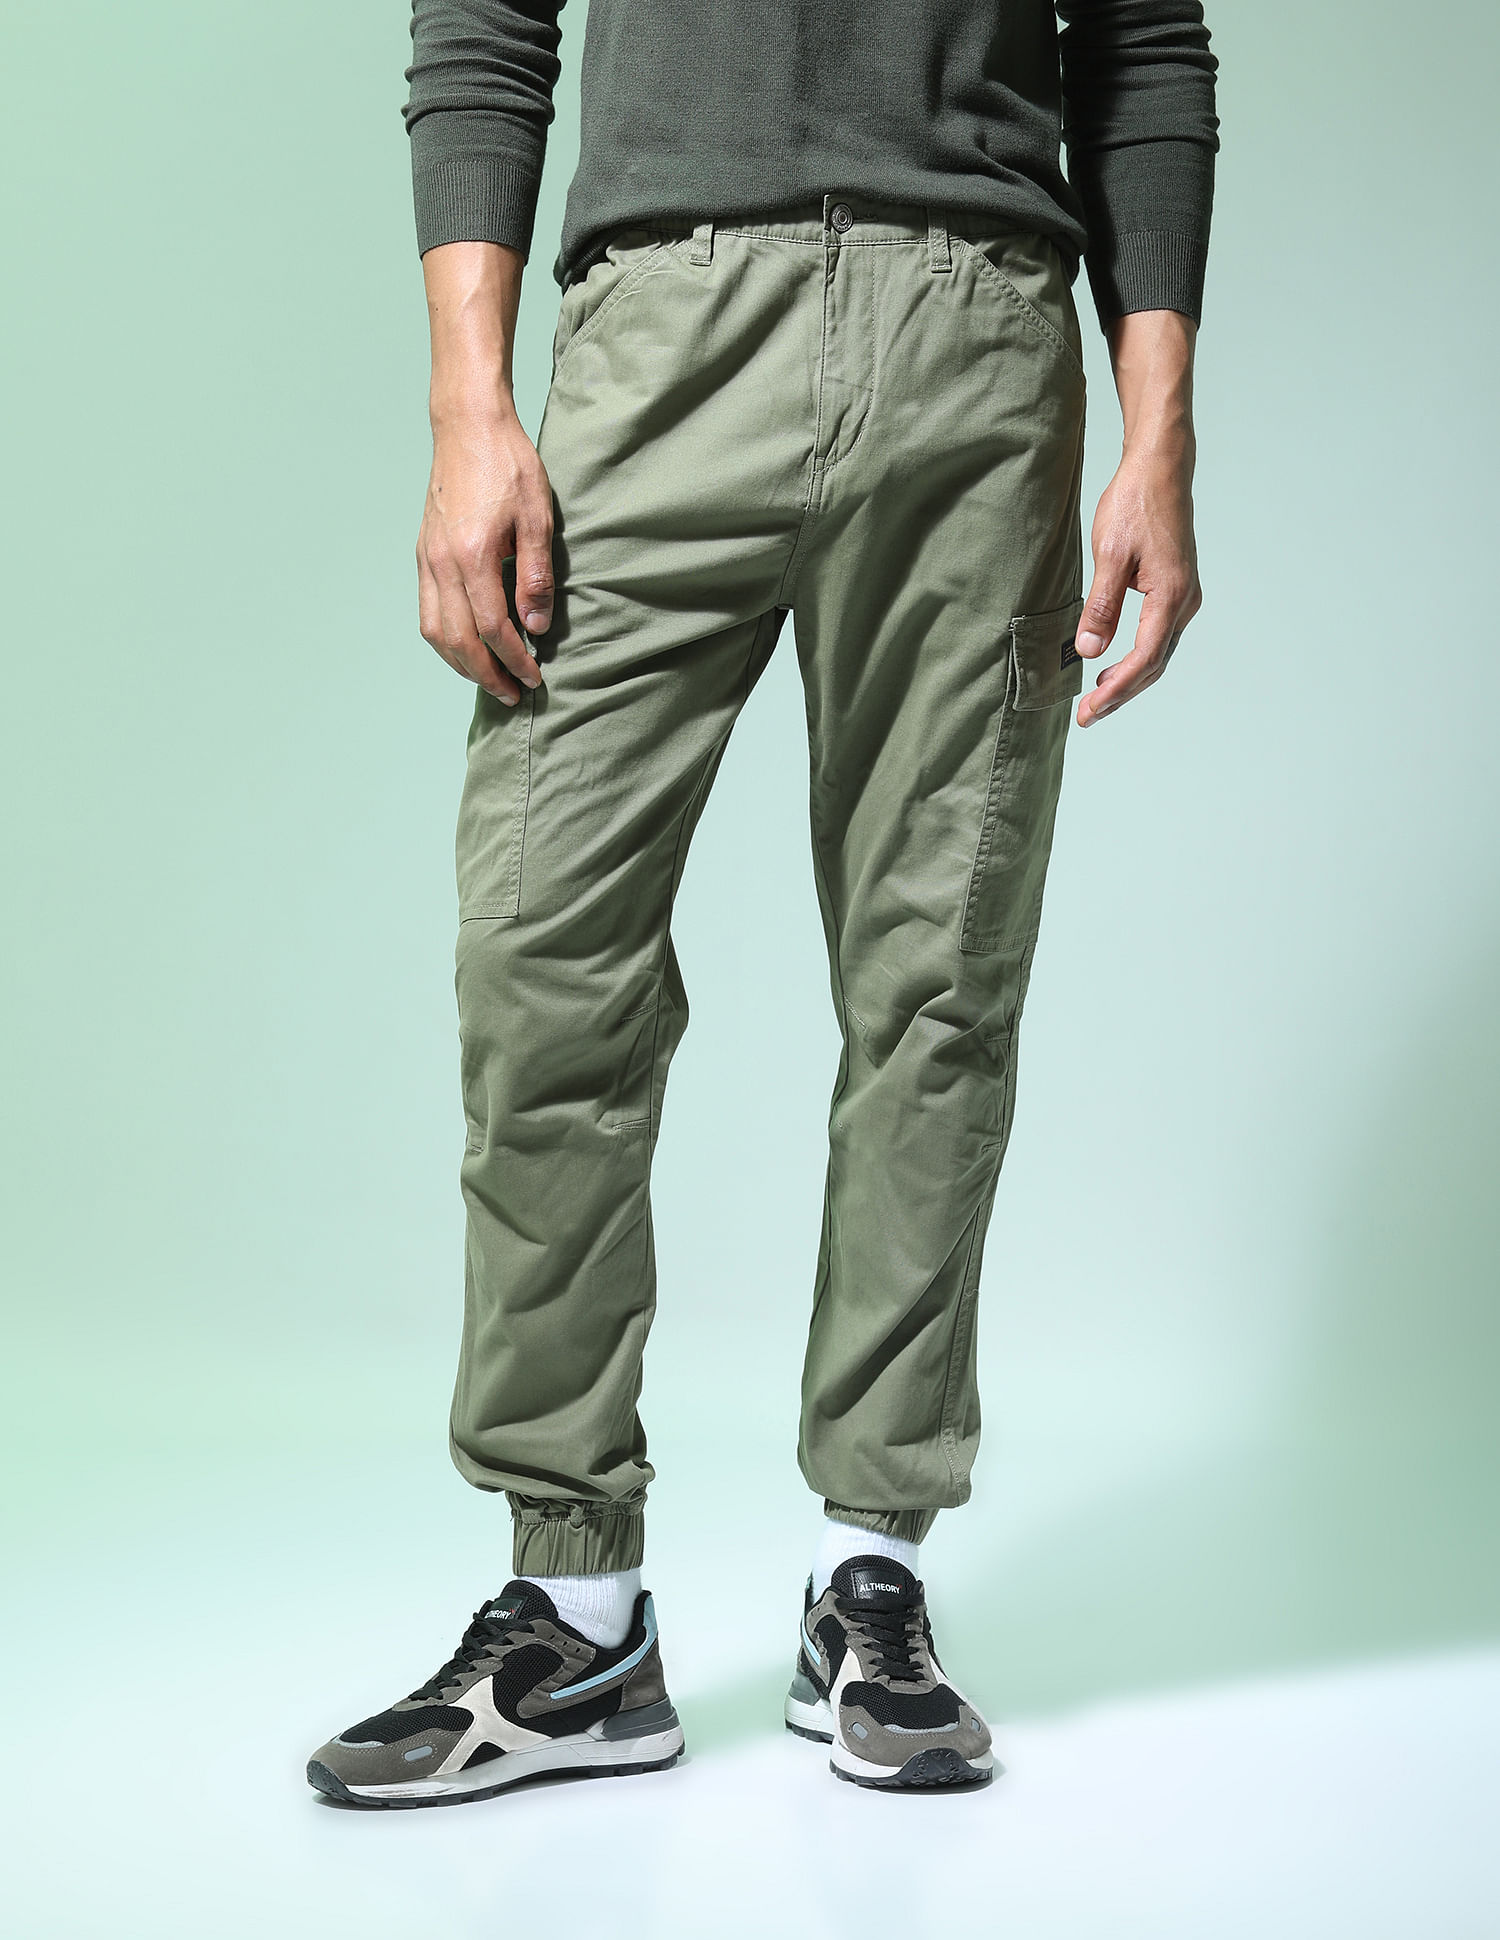 Cash Green Mid Rise Slim Fit Cargo Pants | Pepe Jeans India